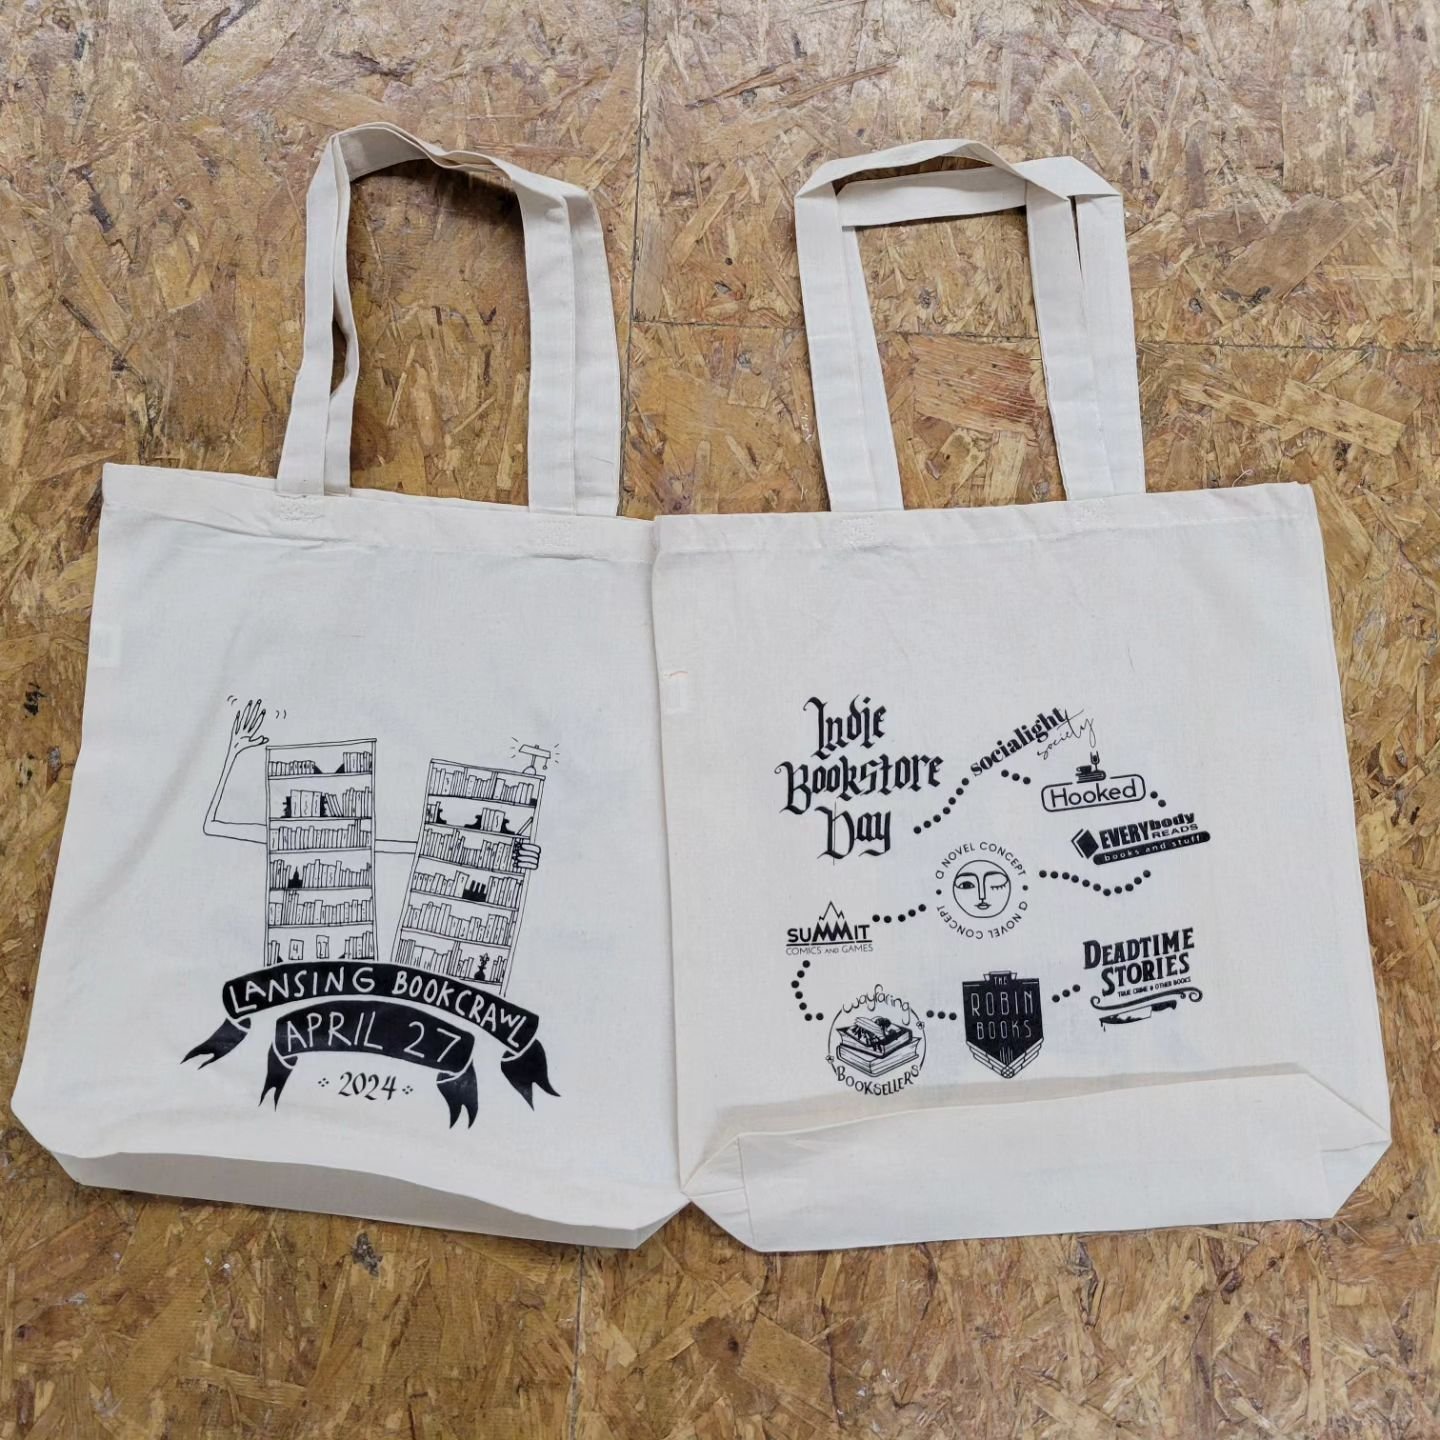 Speaking of Indie bookstore day, here are the tote bags we printed for the event! Hope everyone had fun!